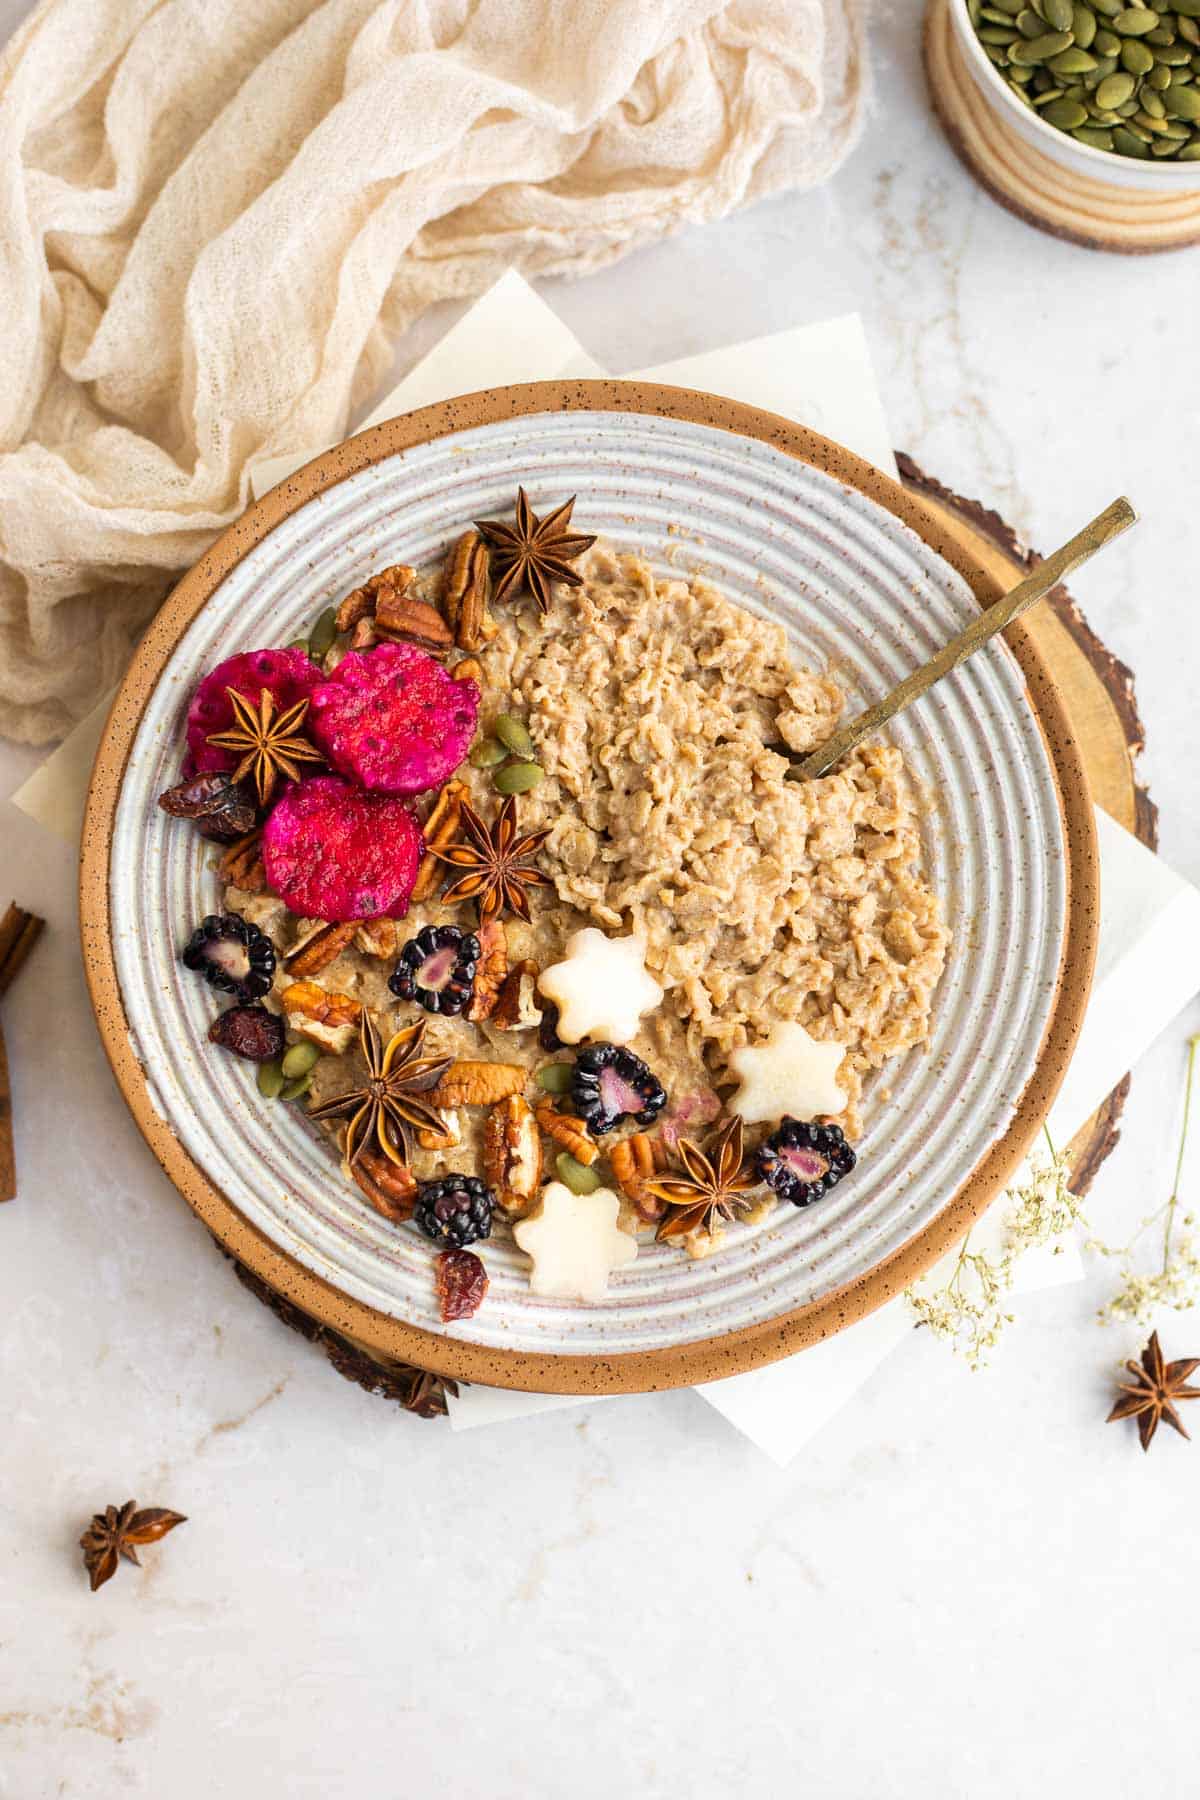 cinnamon oatmeal in a gray bowl with fruit, nuts, and star anise as toppings.